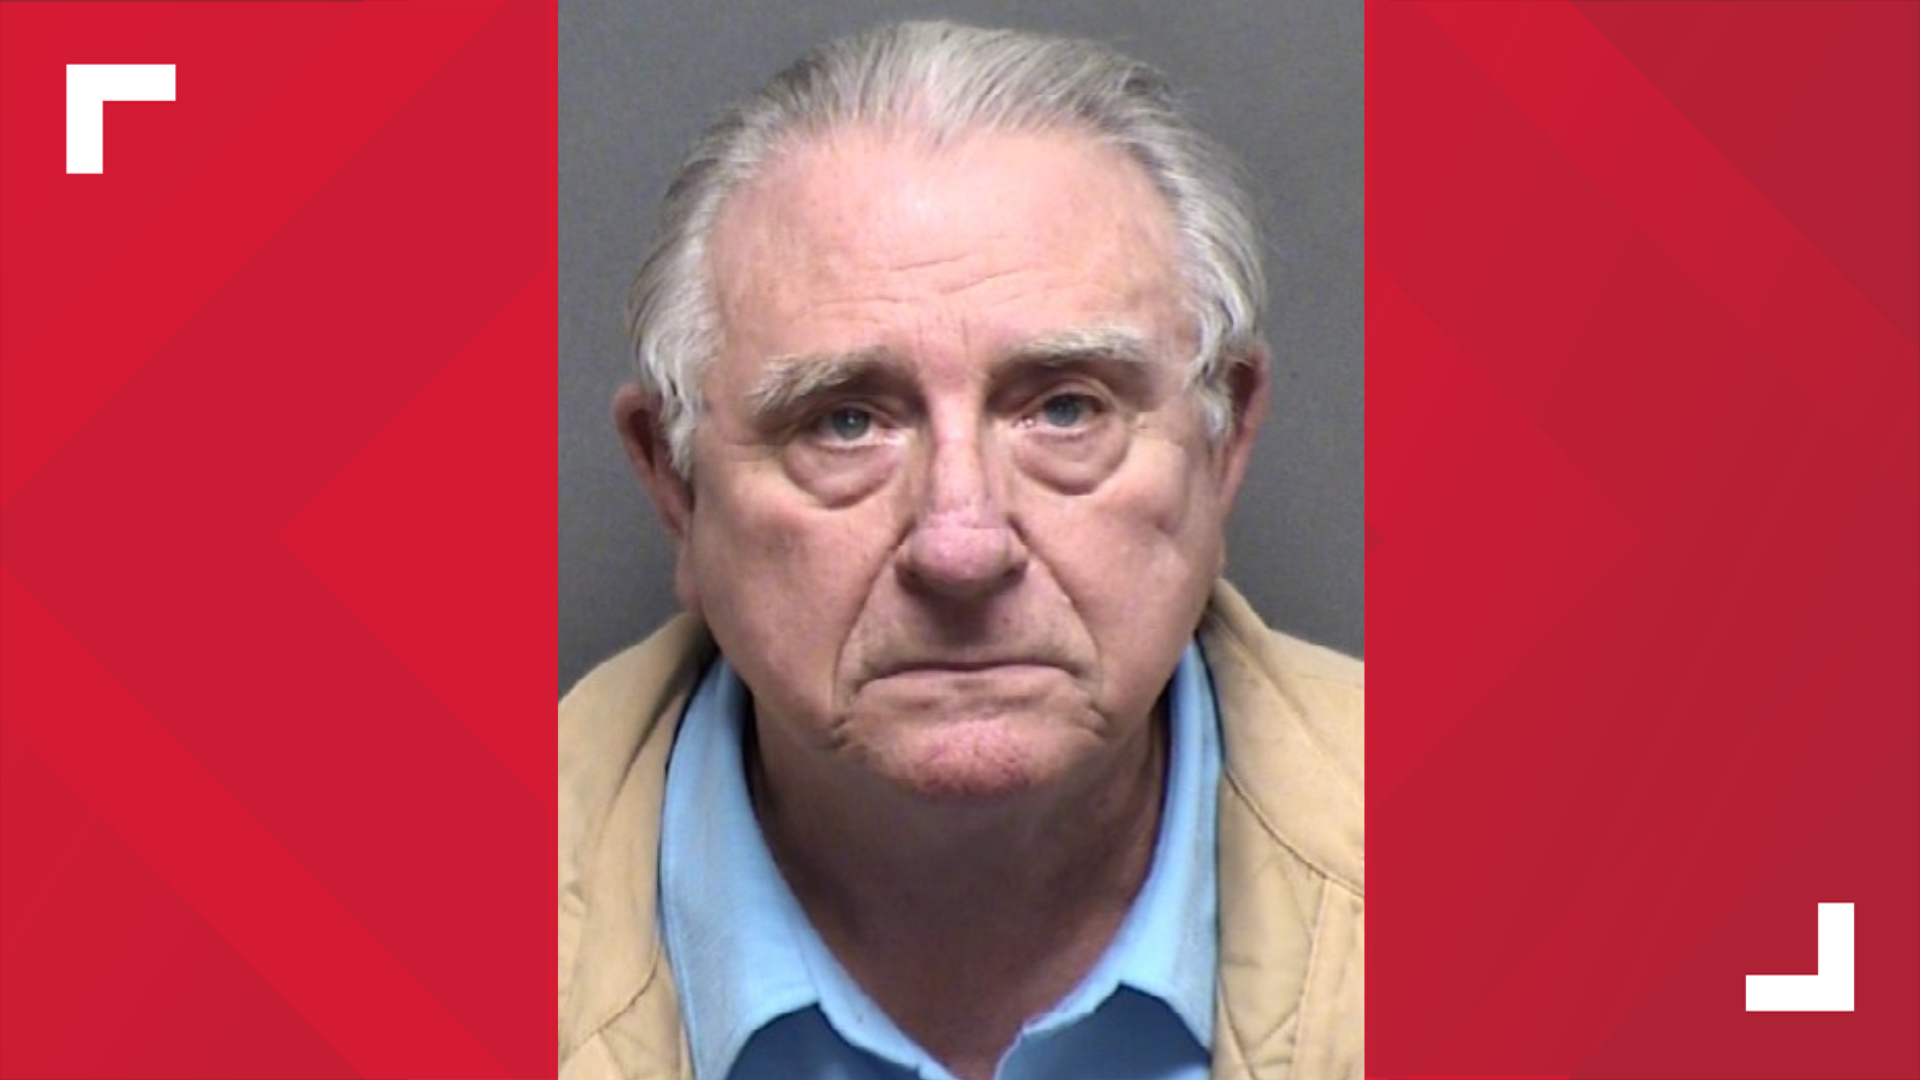 Sex Sex Sex Sexboy - 76-year-old man sentenced to 80 years in prison in connection to state,  federal child sex charges | kens5.com